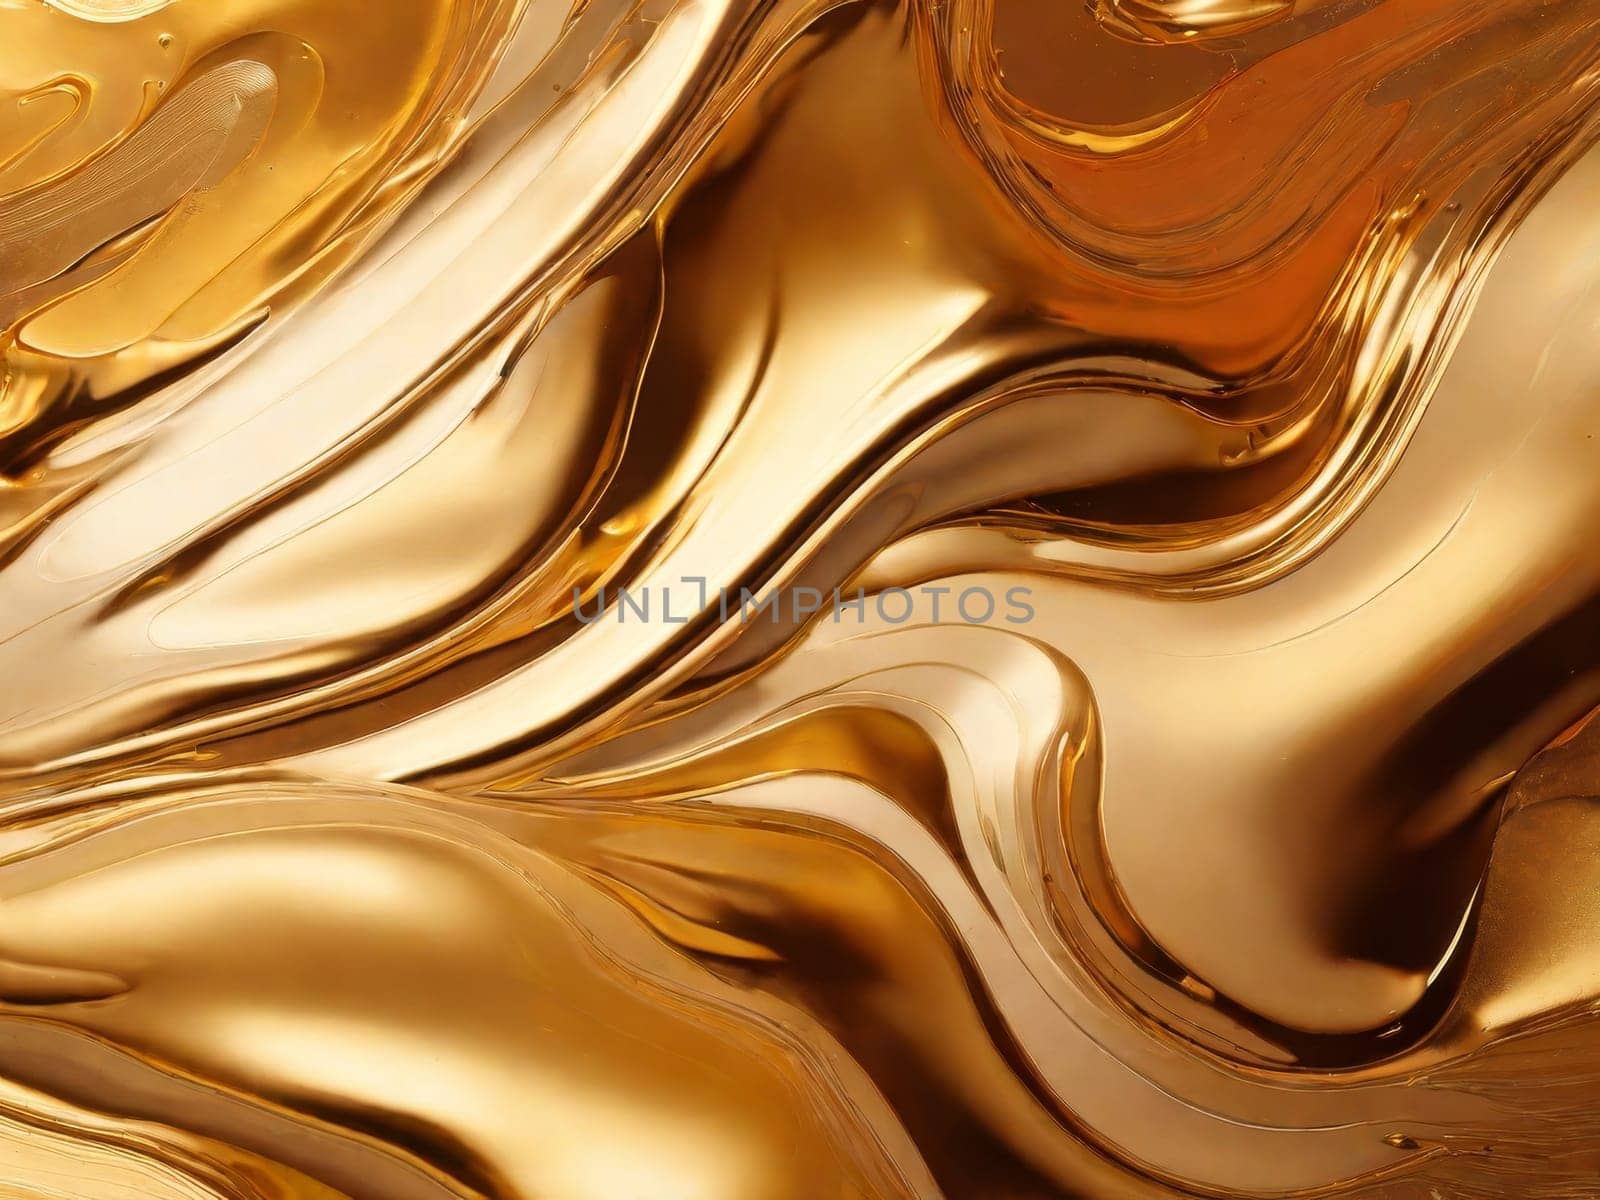 Painted background. Abstract emotional art. Modern design element. Golden liquid acrylic paints by Ekaterina34